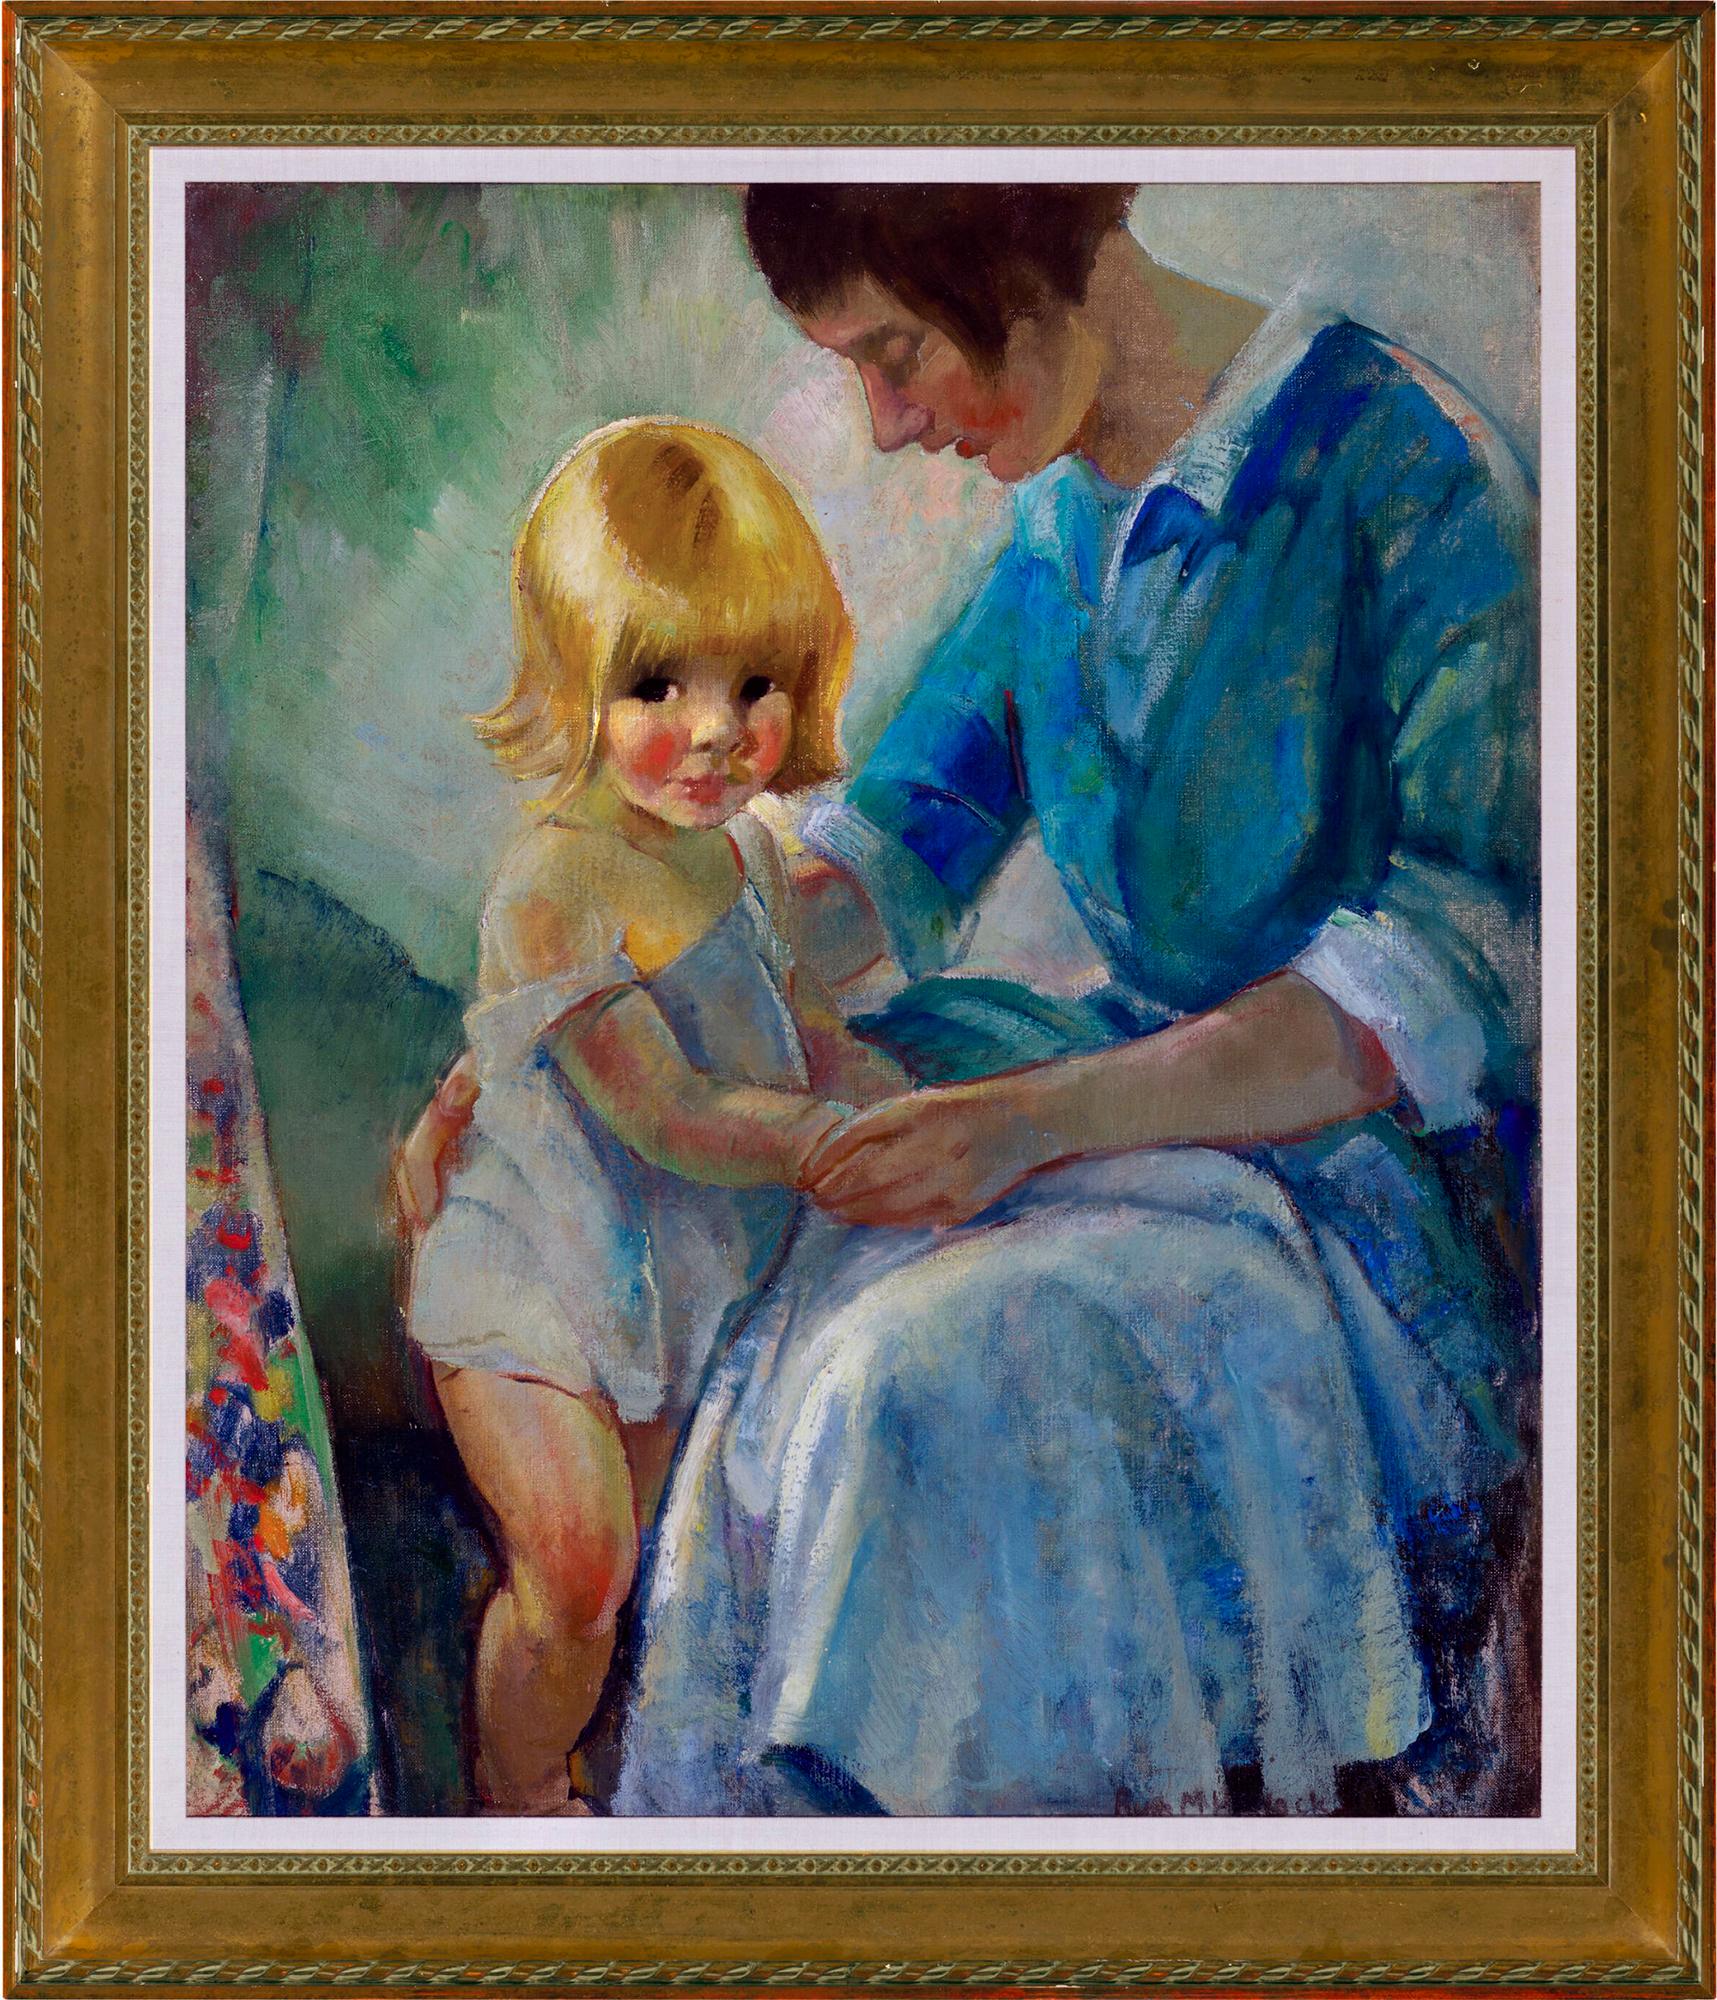 Mother and Child in  Tender Moment - Female Illustrator Golden Age - Painting by Ruth Mary Hallock